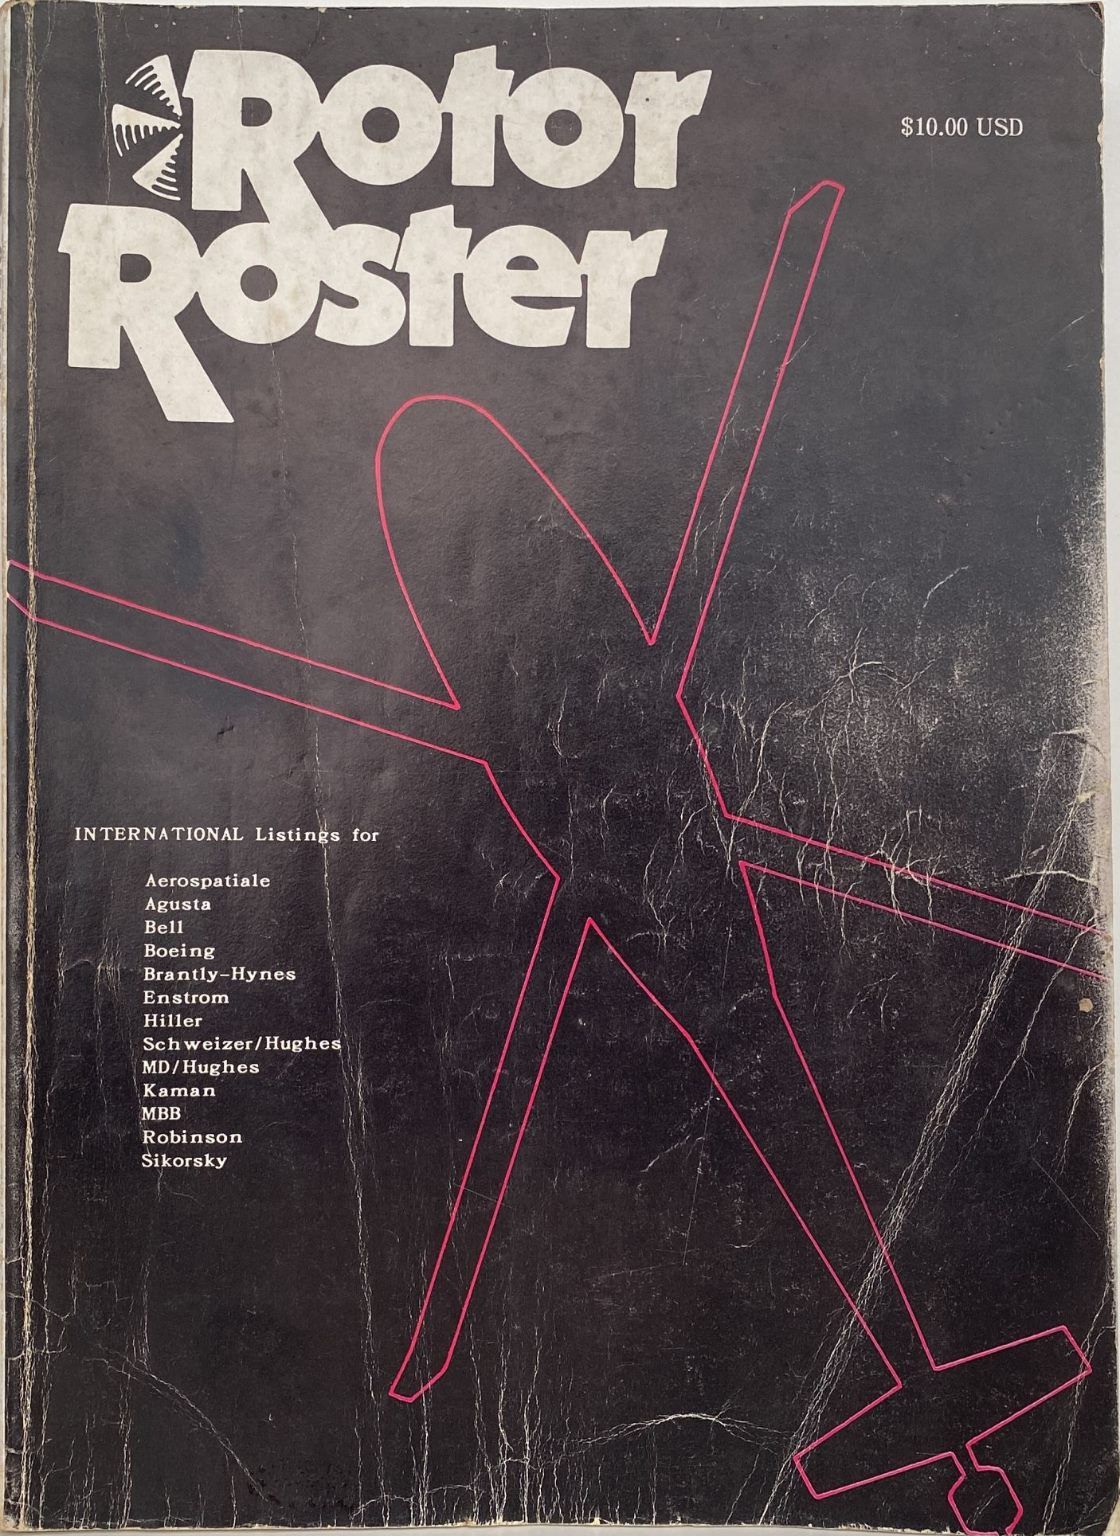 ROTOR ROSTER 1988: The Worldwide Reference Book of Civil Helicopters